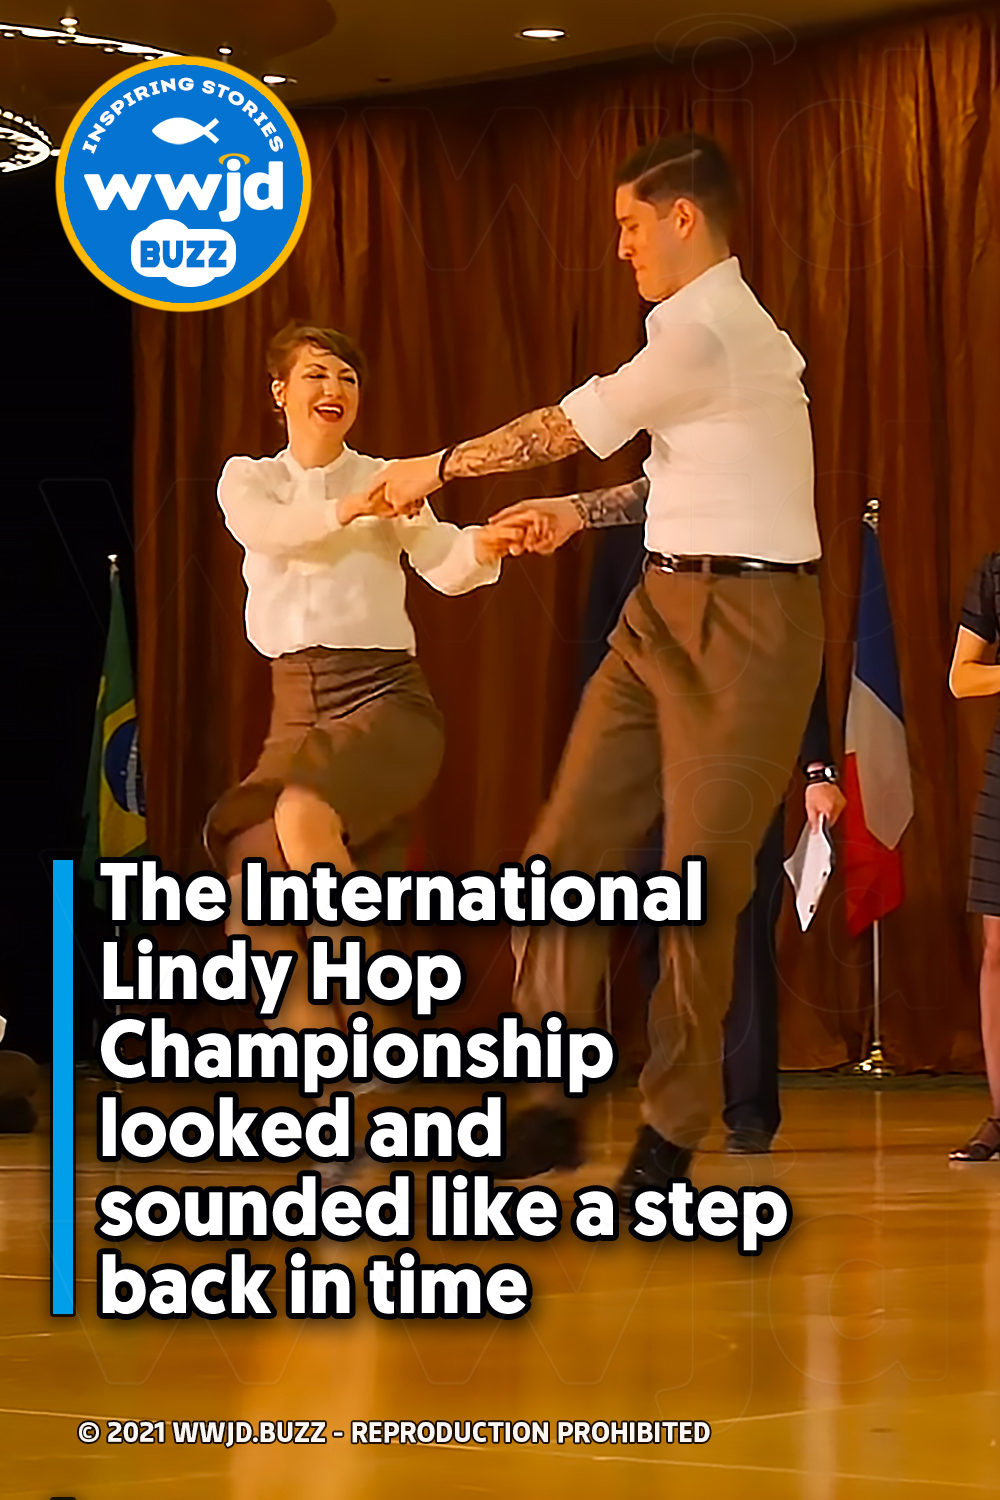 The International Lindy Hop Championship looked and sounded like a step back in time